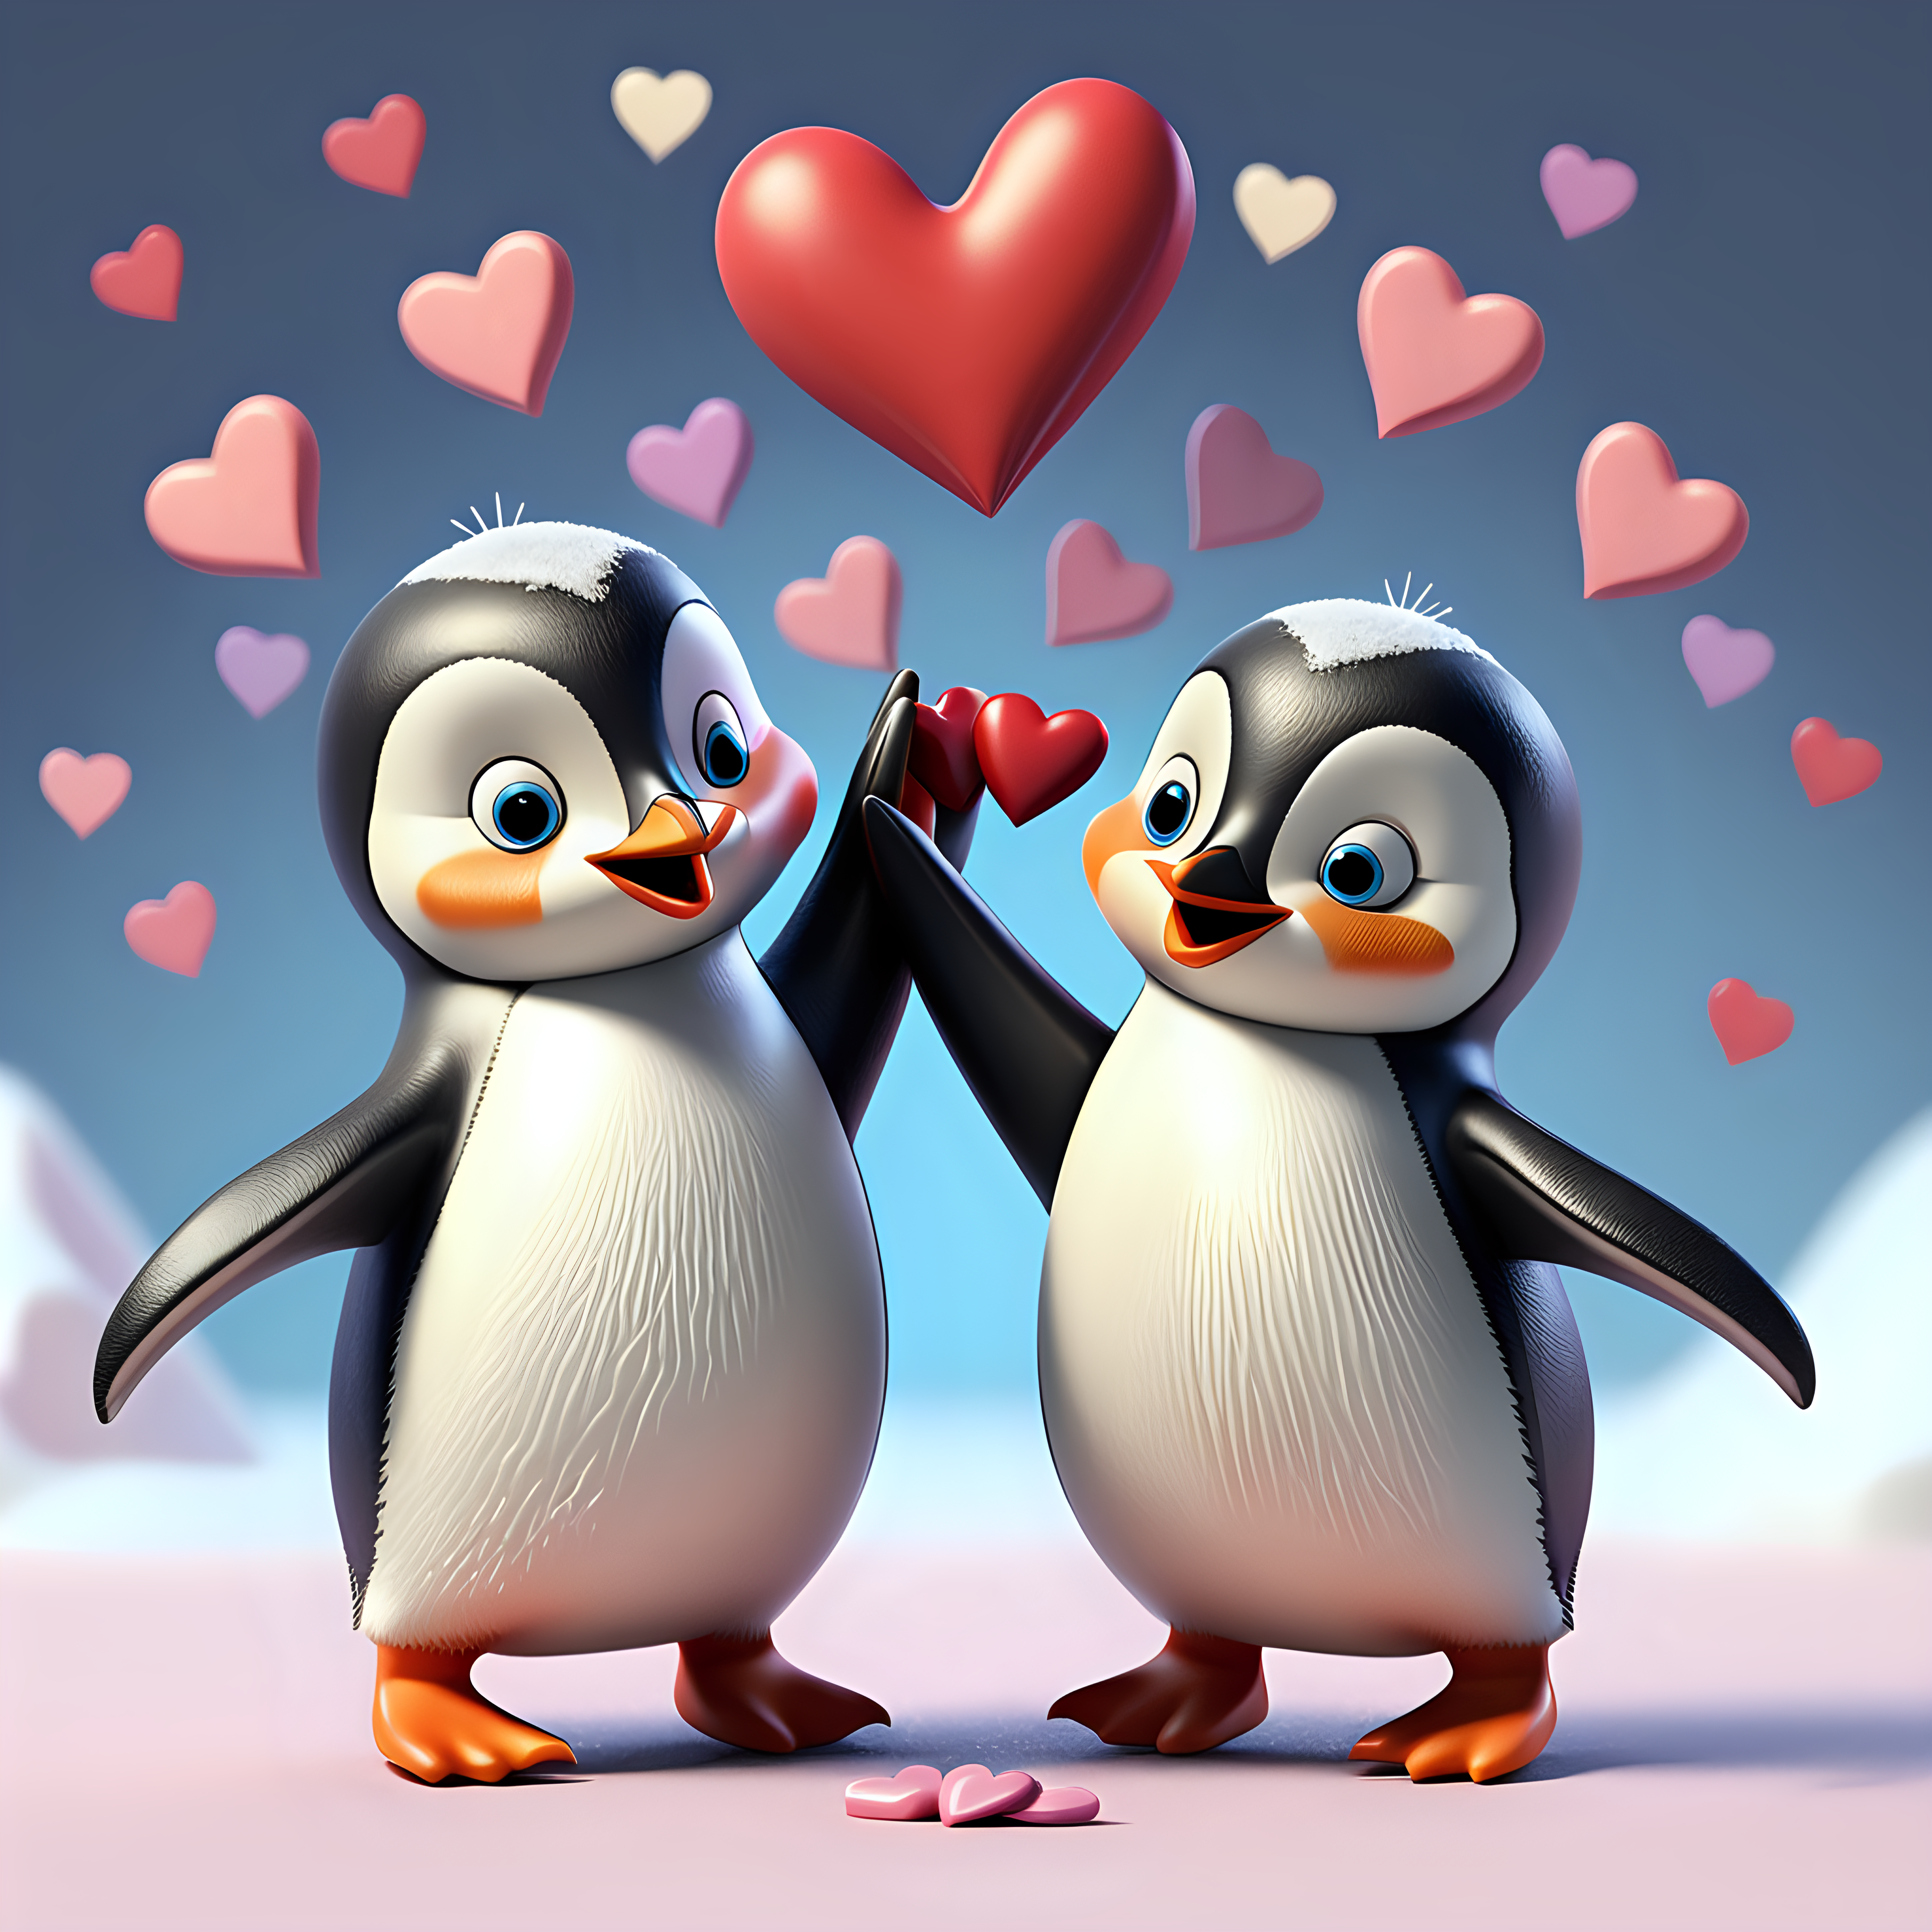 two cute penguins holdoing hands dancing with love hearts
